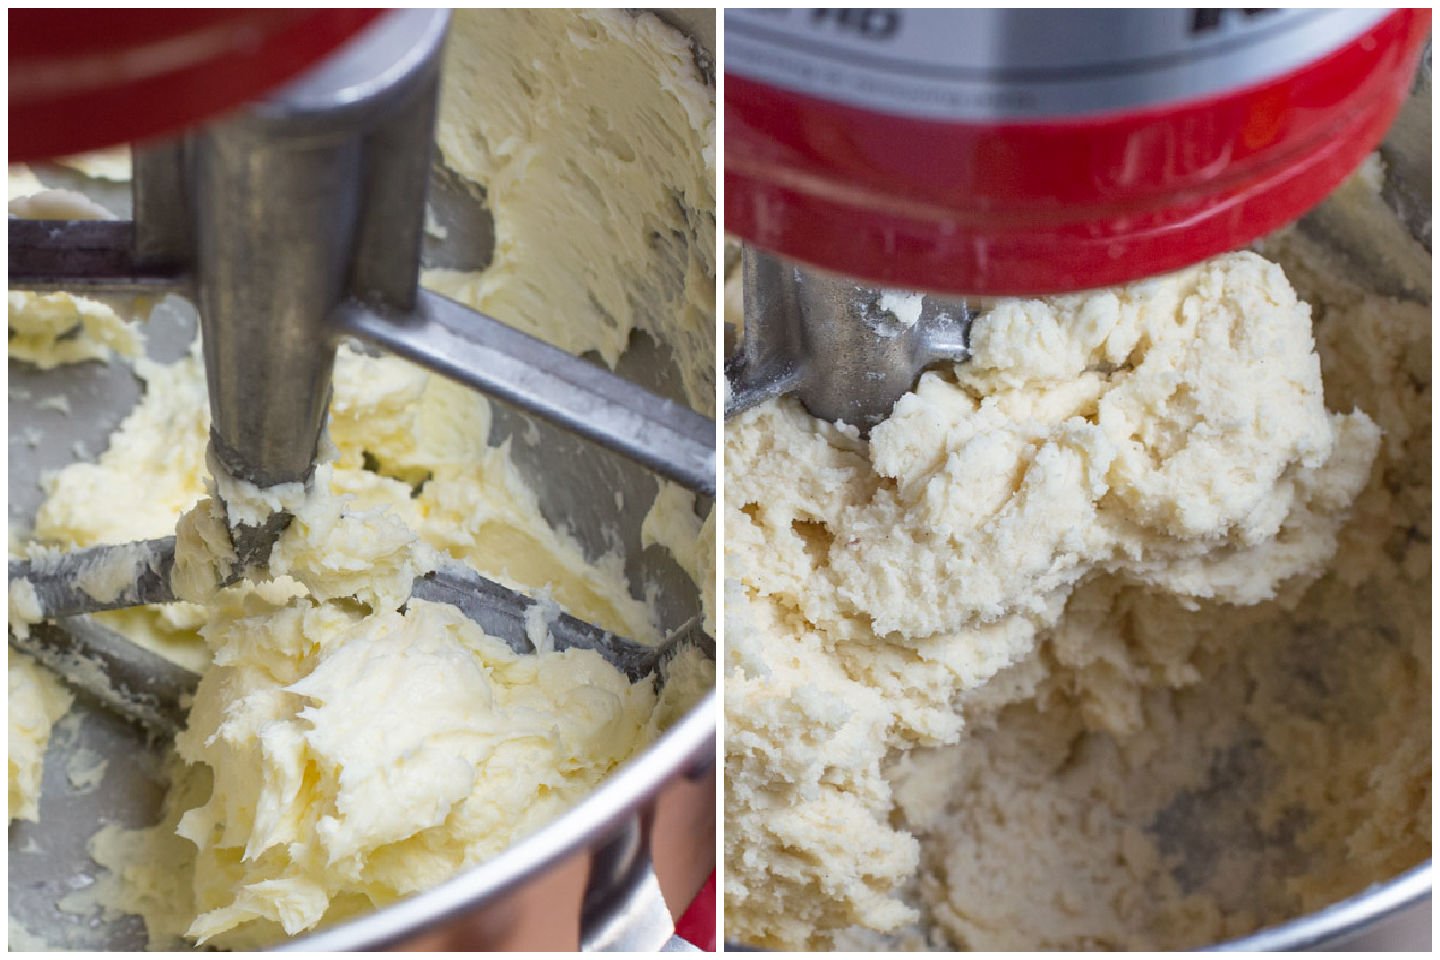 Mixer beating butter and sugar and next phots of mixed cookie dough.